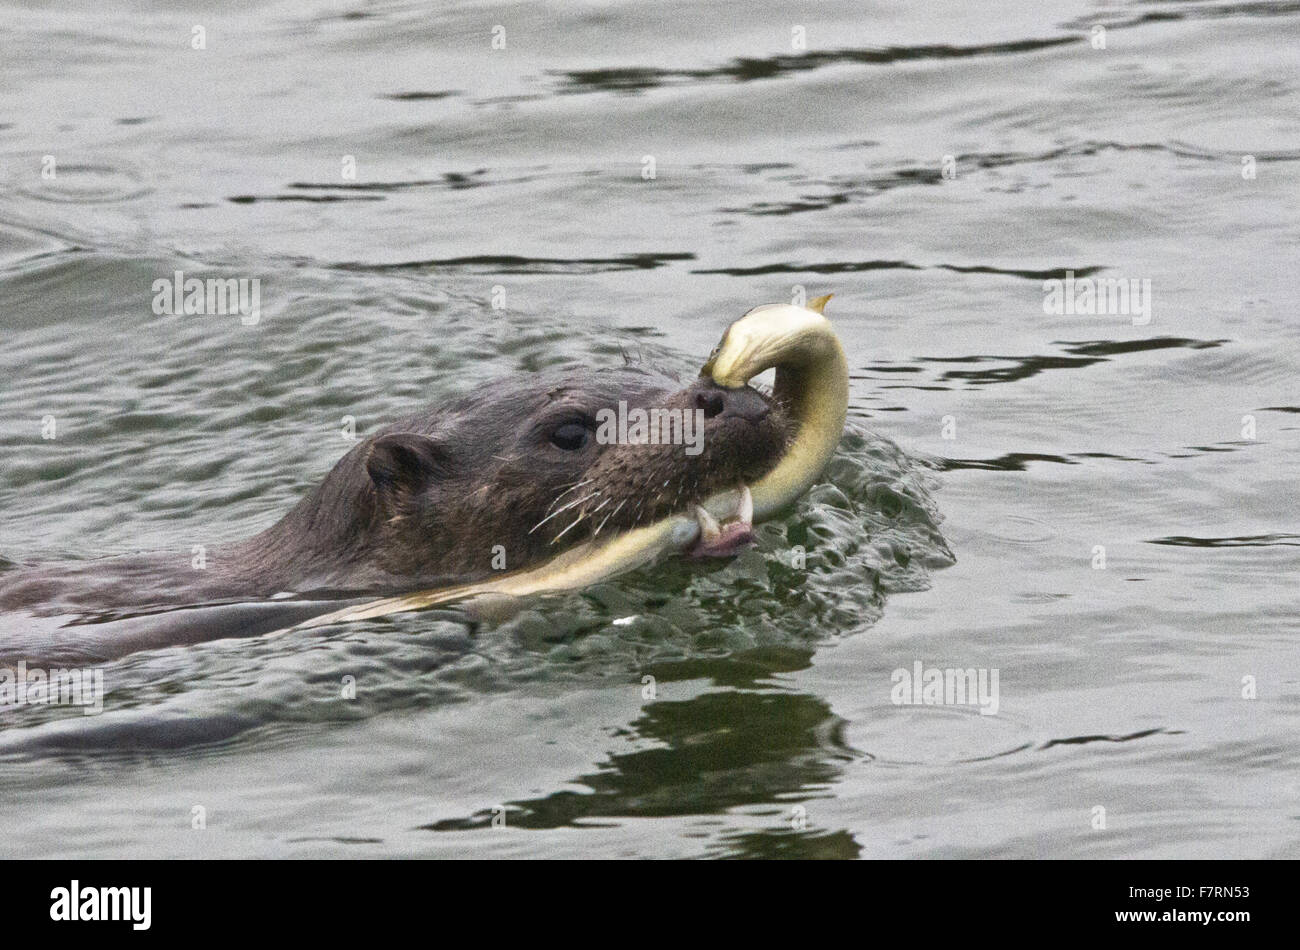 Otter, swimming on the surface of the water, with its catch of an eel Stock Photo